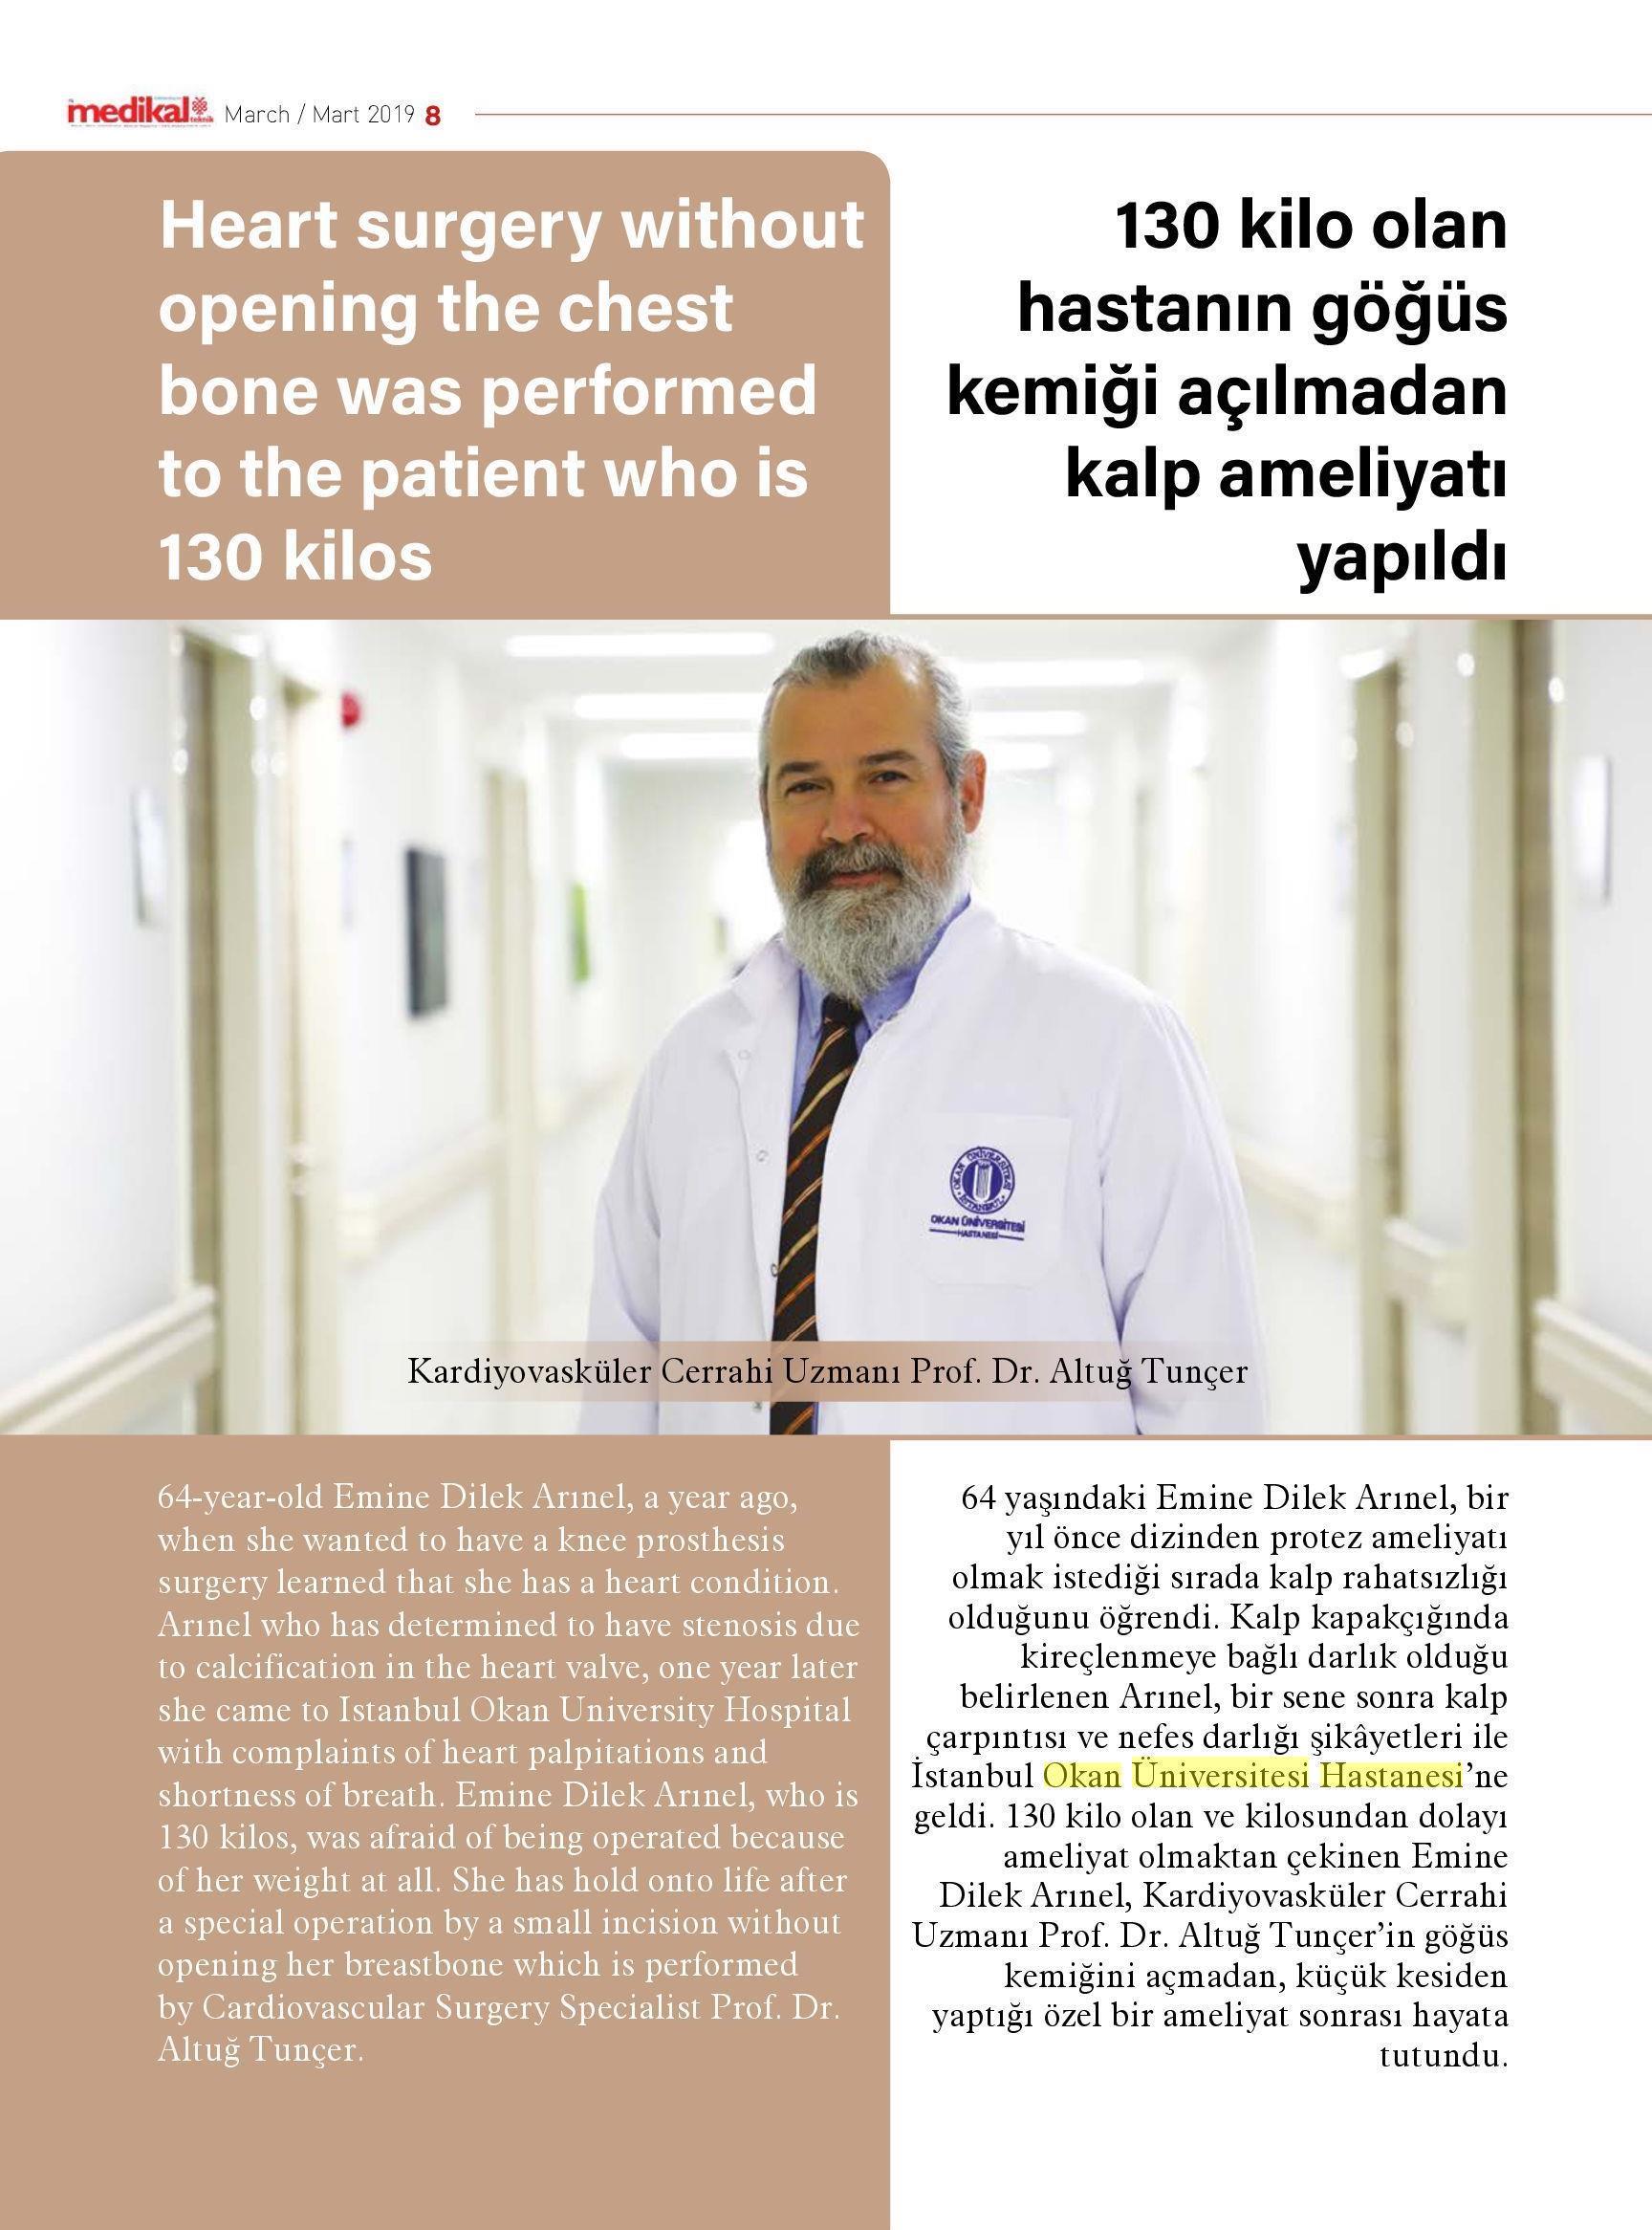 01.03.2019	Medikal Teknik	HEART SURGERY WİTHOUT OPENİNG THE CHEST BONE WAS PERFORMED TO THE PATİENT